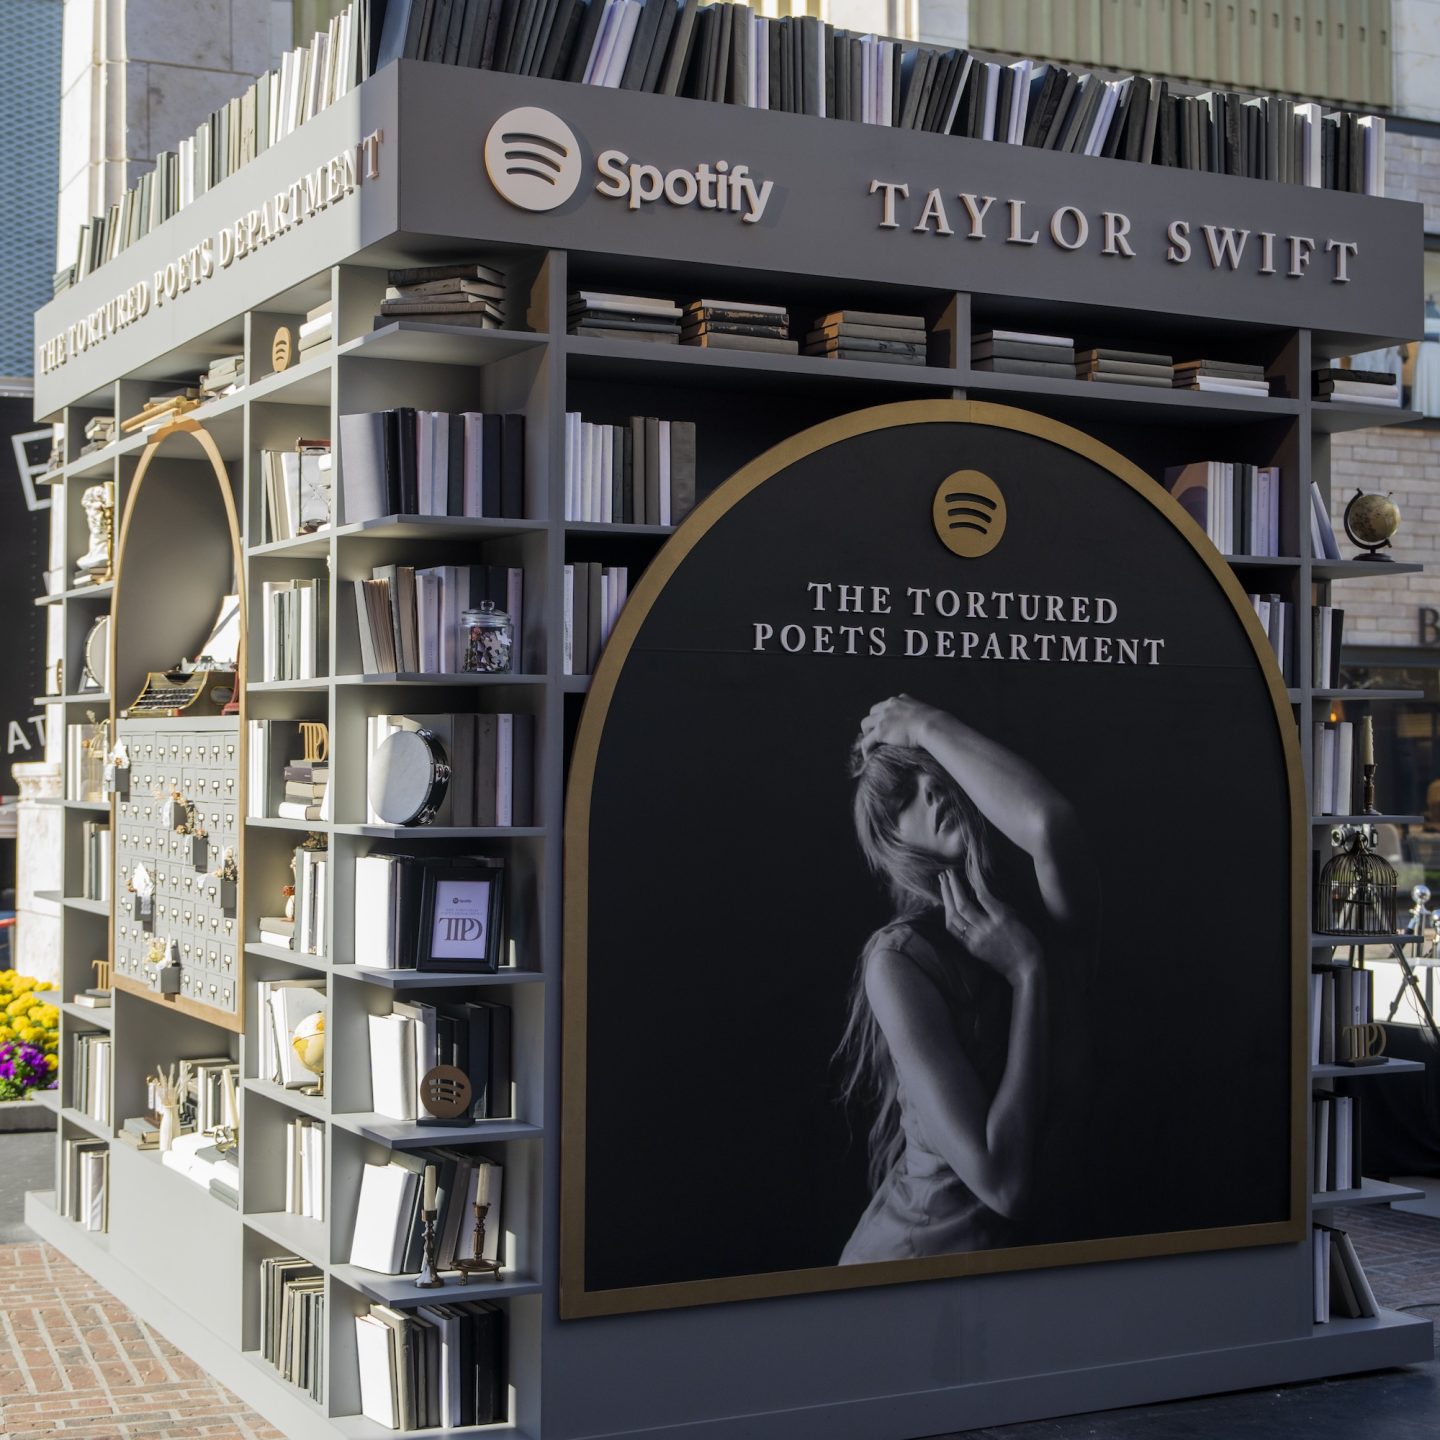 The Tortured Poets Department pop-up in New York City. Photo via Taylor Swift.